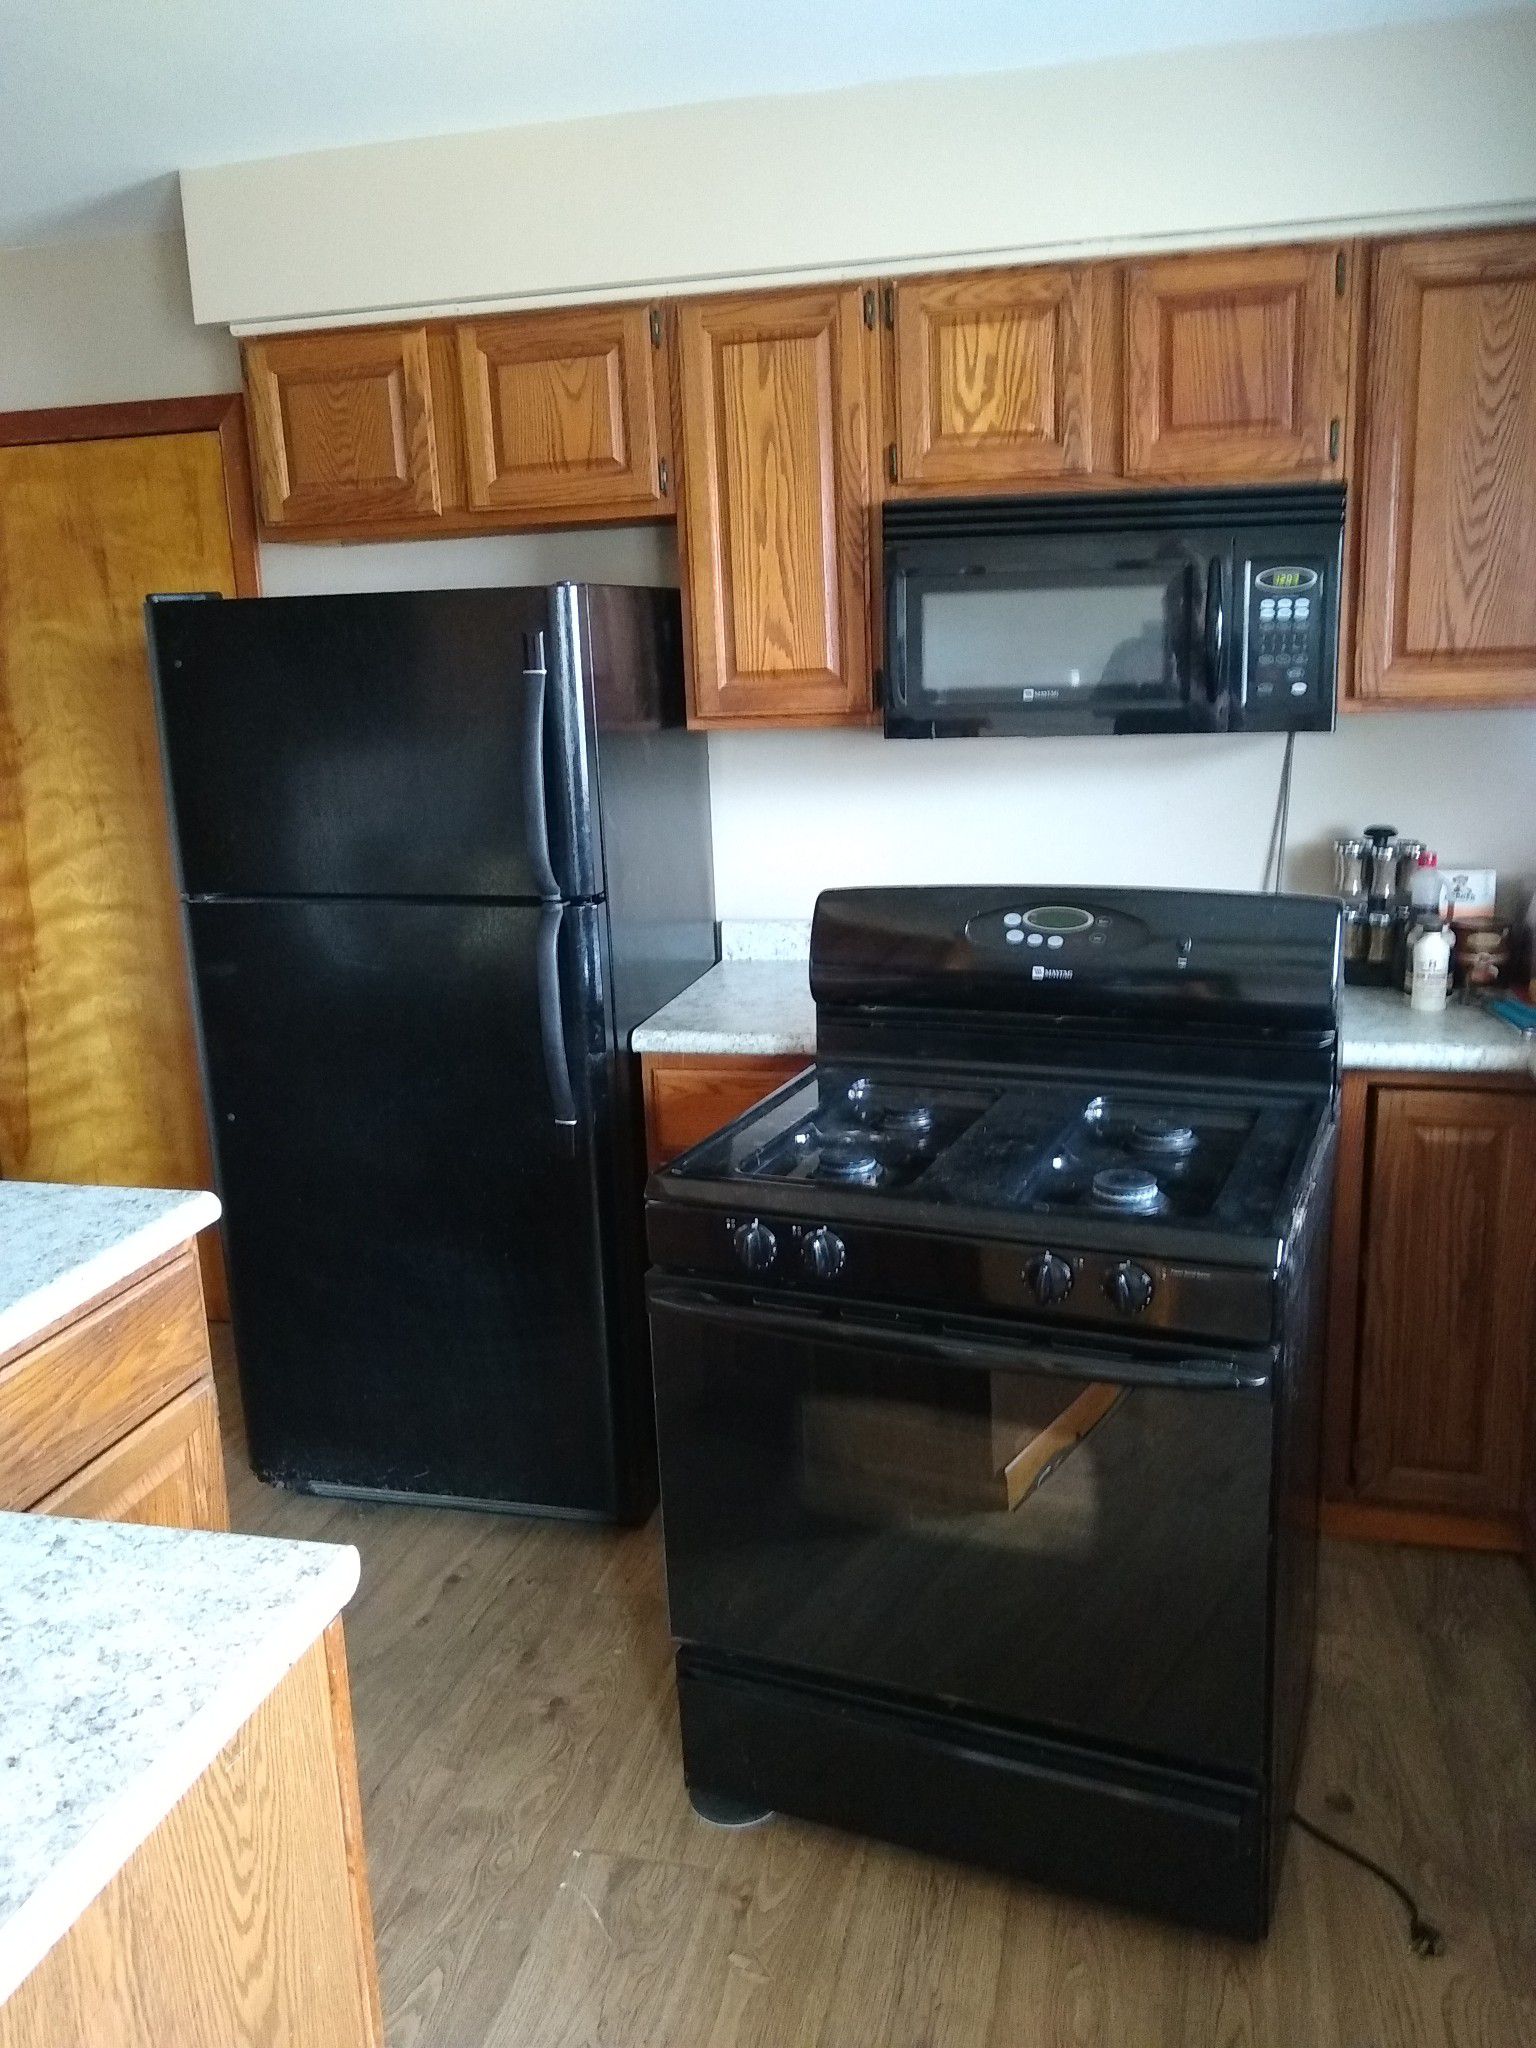 Maytag 's refrigerator , gas range and microwave